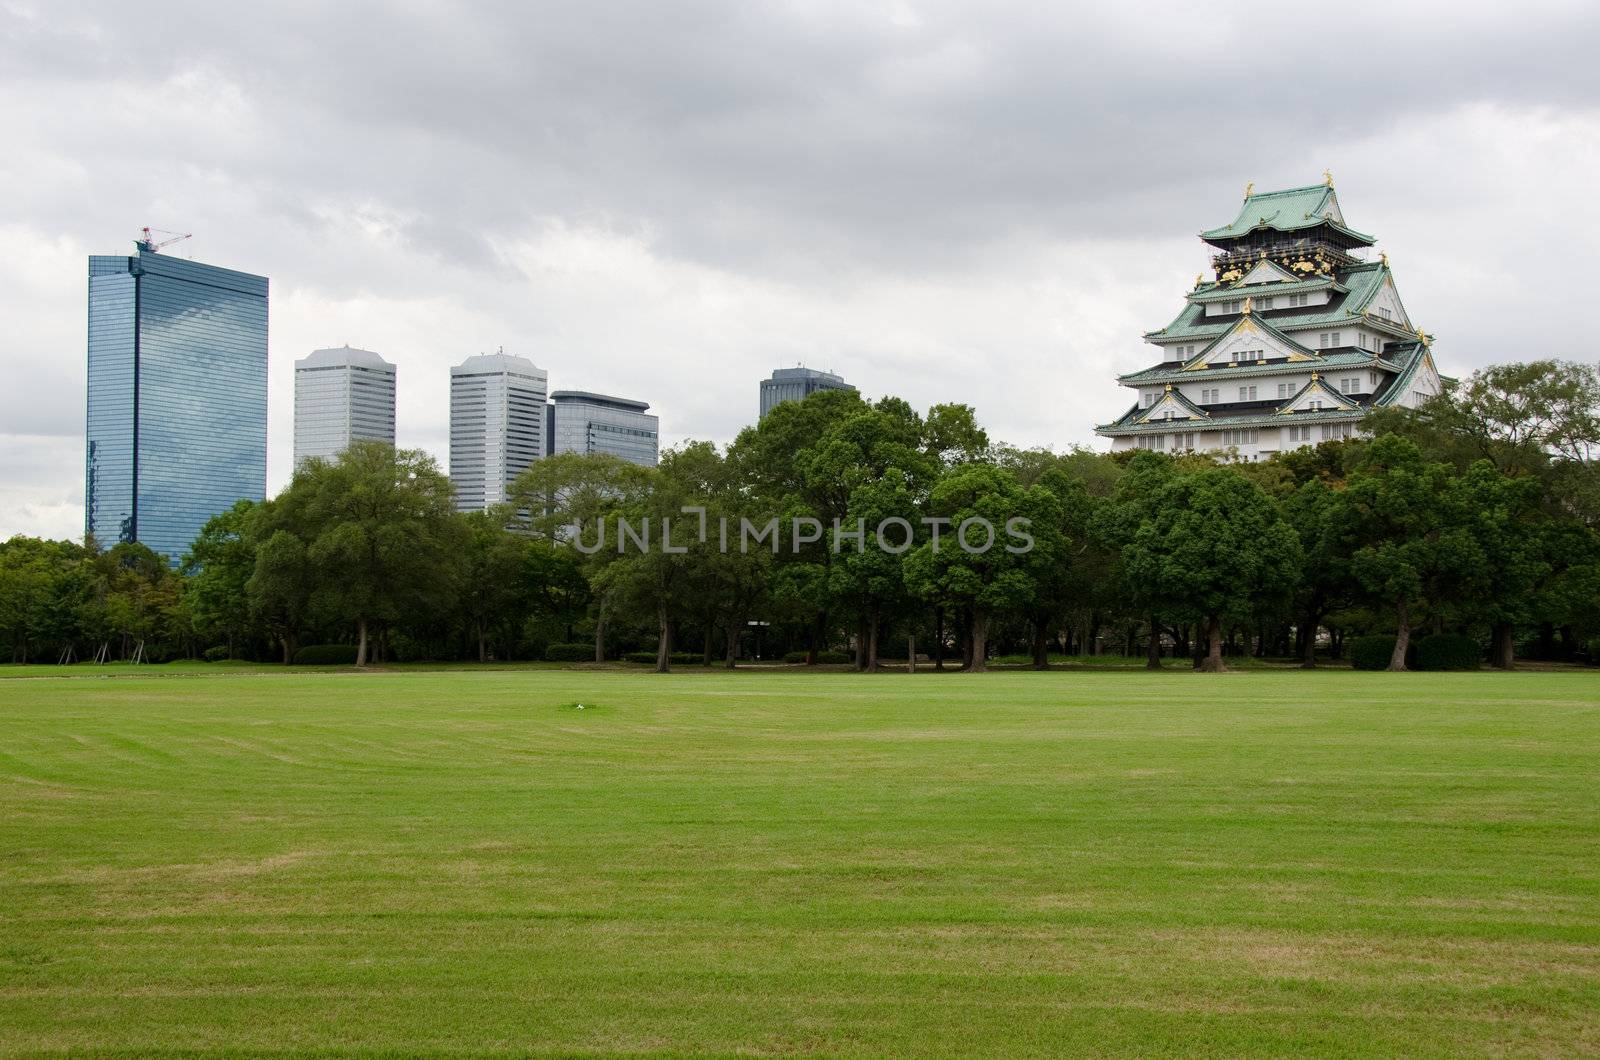 The Osaka Castle. One of Japans most famous castles next to modern skyscrapers